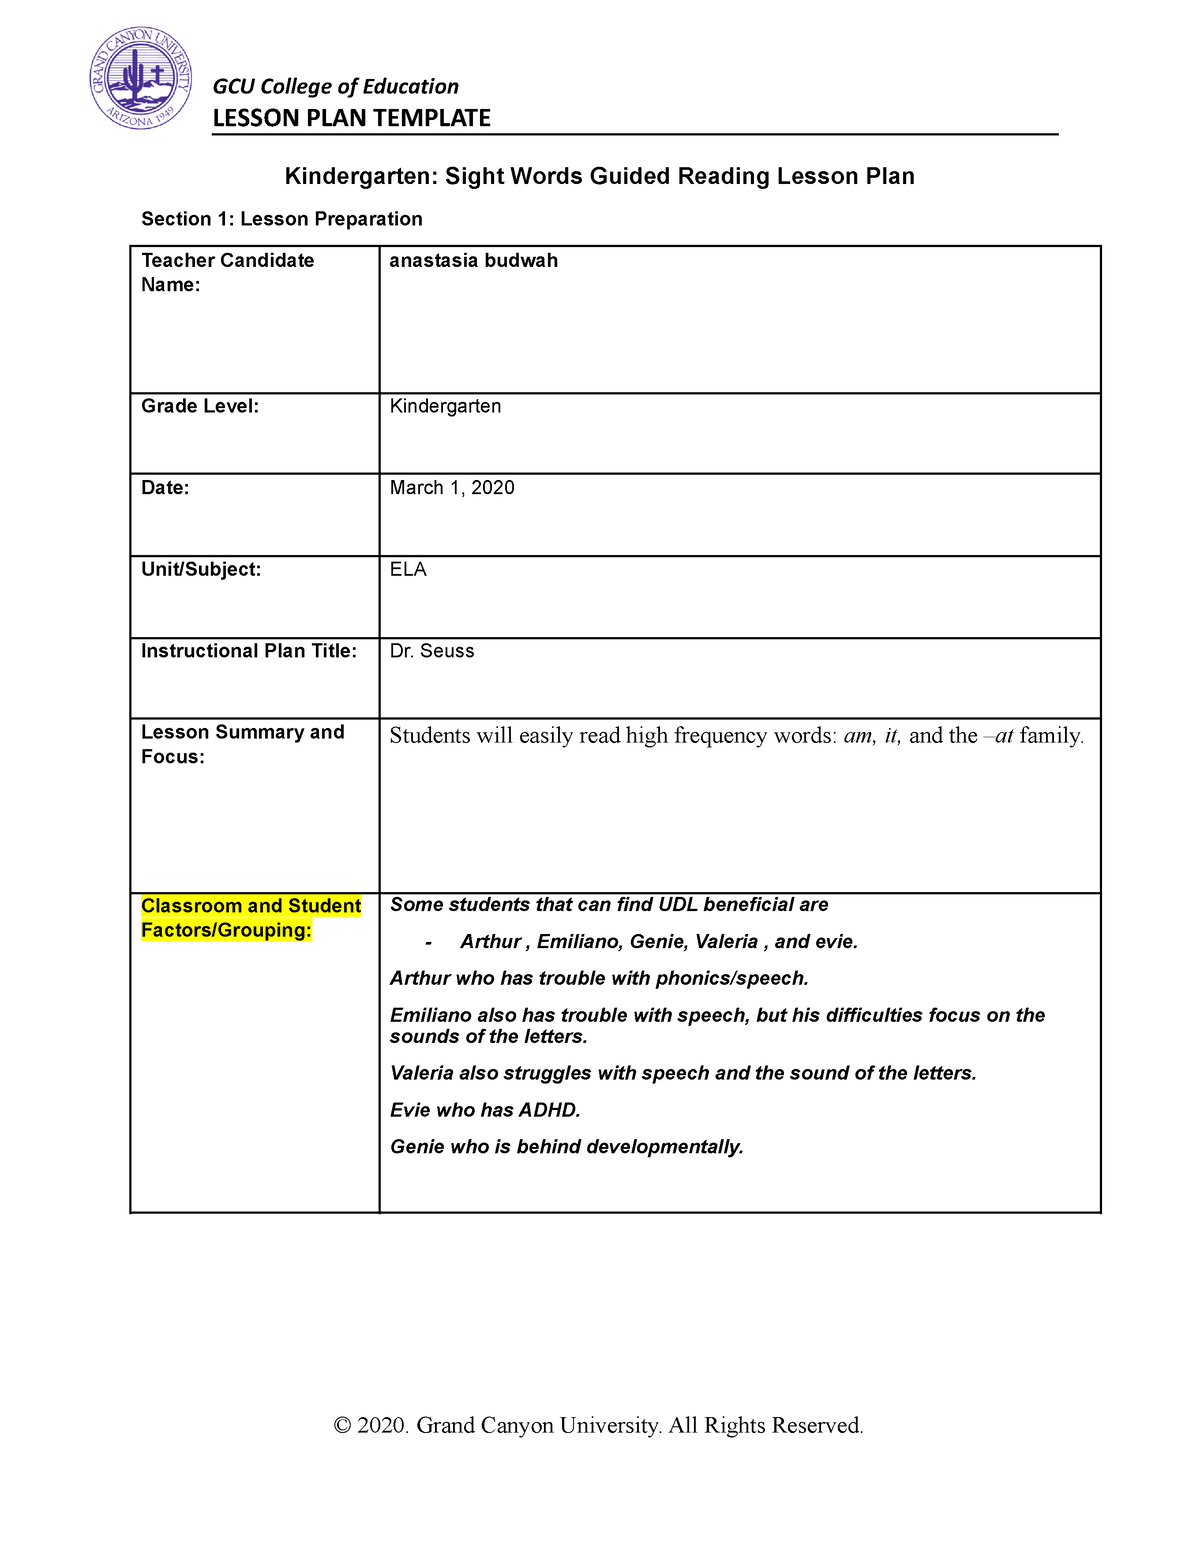 SPD-200-RS-Kindergarten-Sight-Words-Guided-Reading-Lesson-Plan - LESSON ...